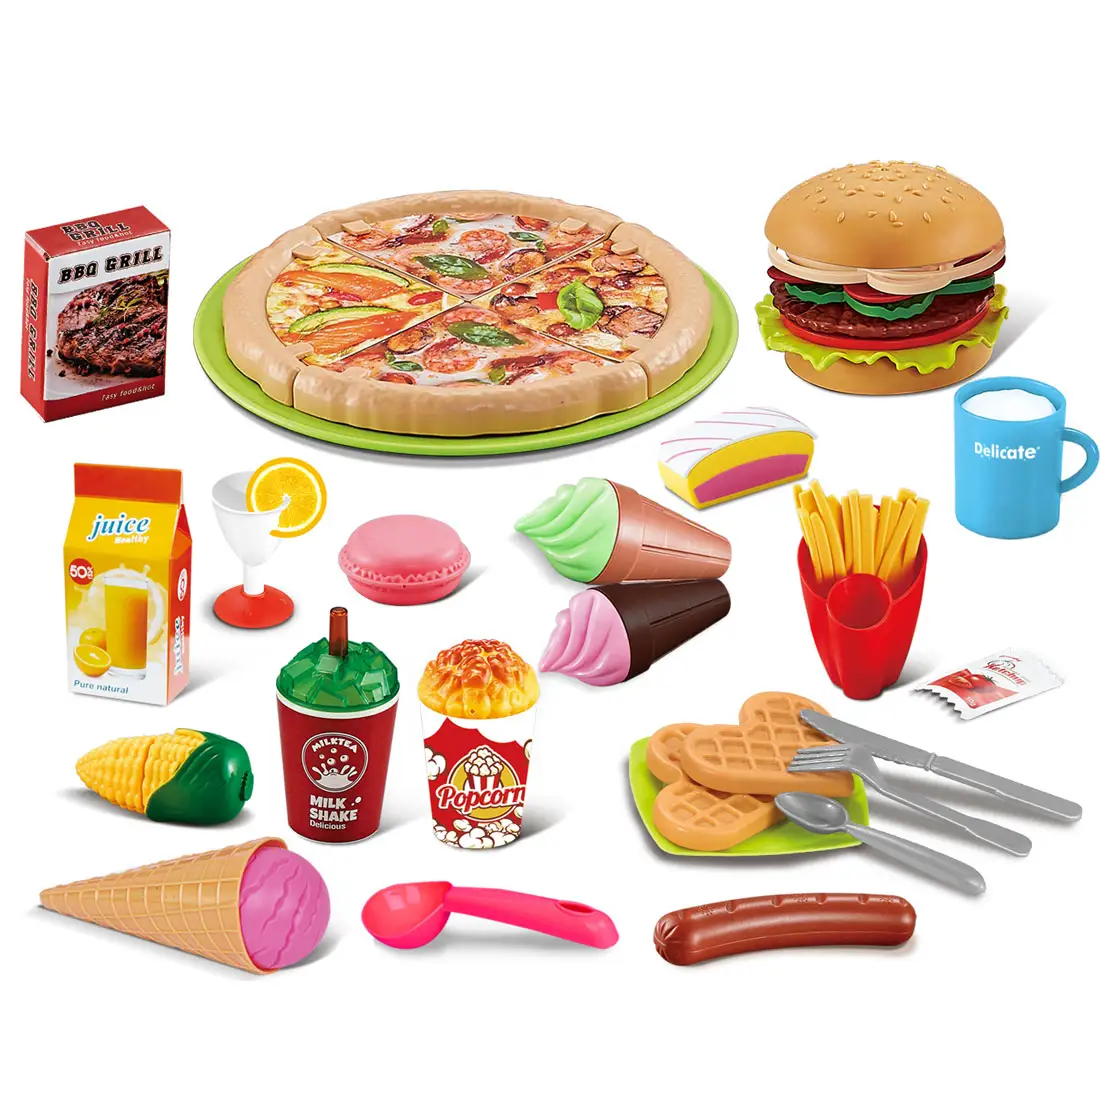 Role Play Fast food with Pizza Hamburger model Kitchen Toys Set Plastic Kitchen Cutting Food toy for girl and boy